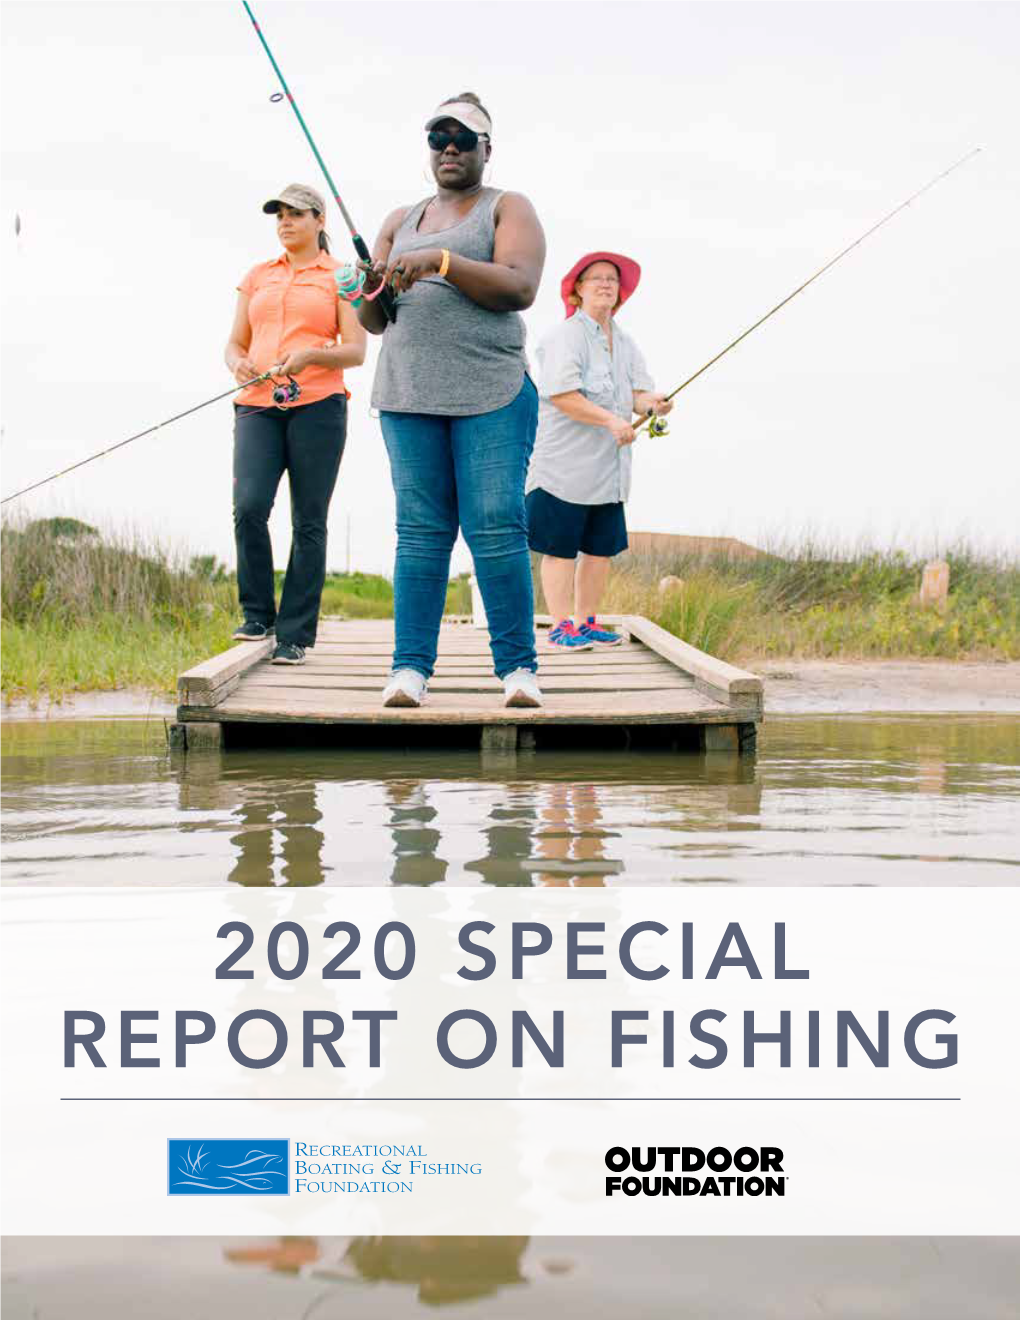 2020 Special Report on Fishing Contents